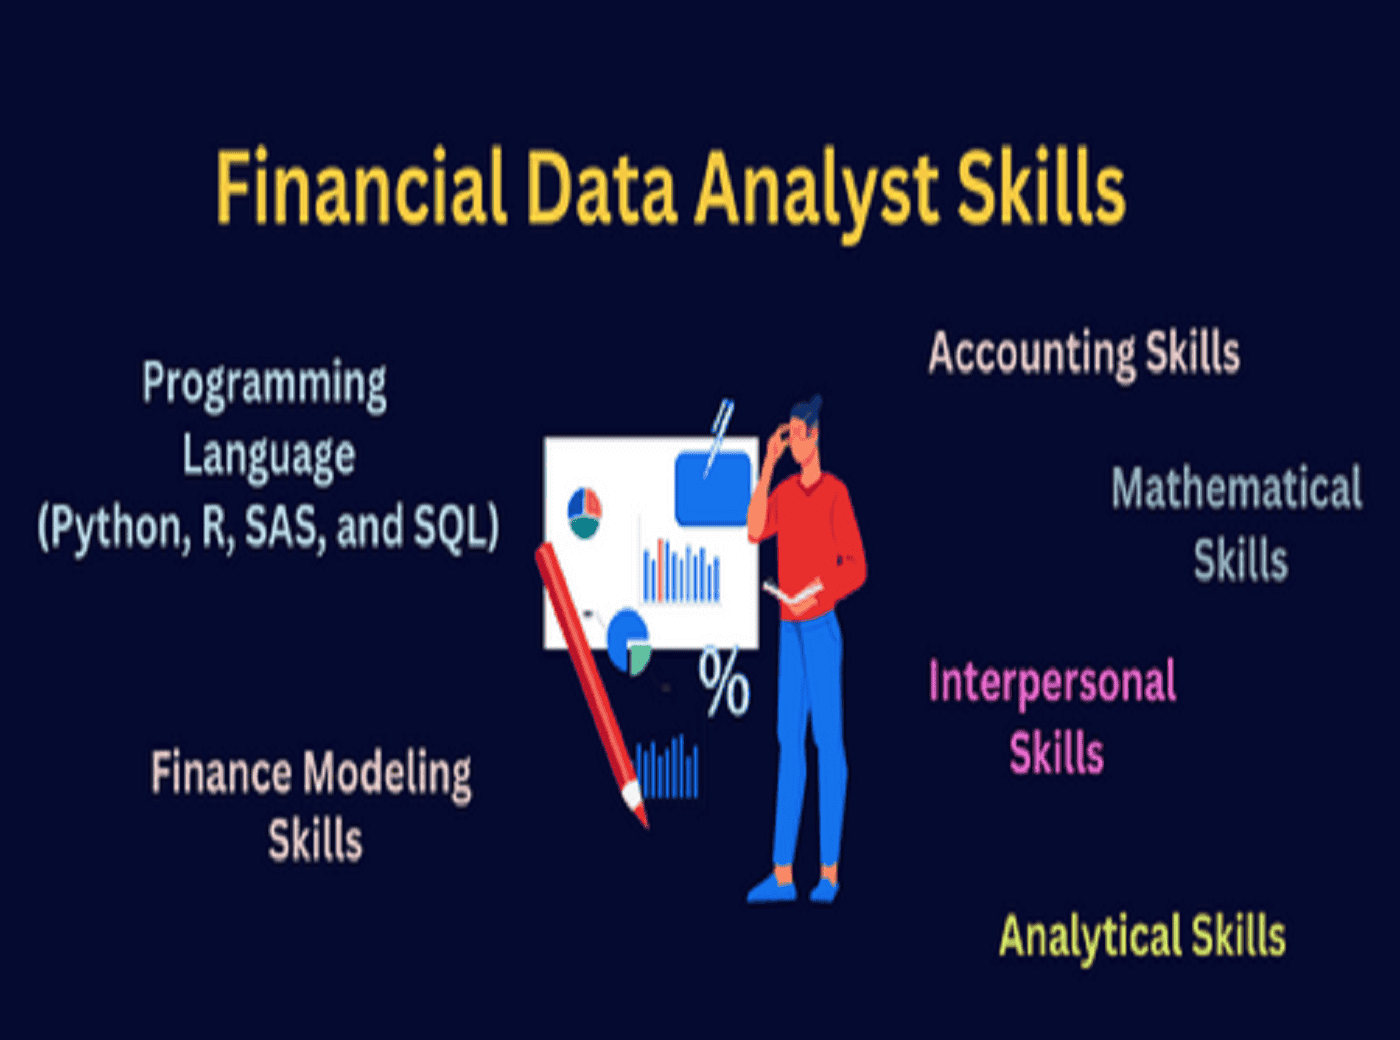 How can Financial Analysts start leveraging data skills?